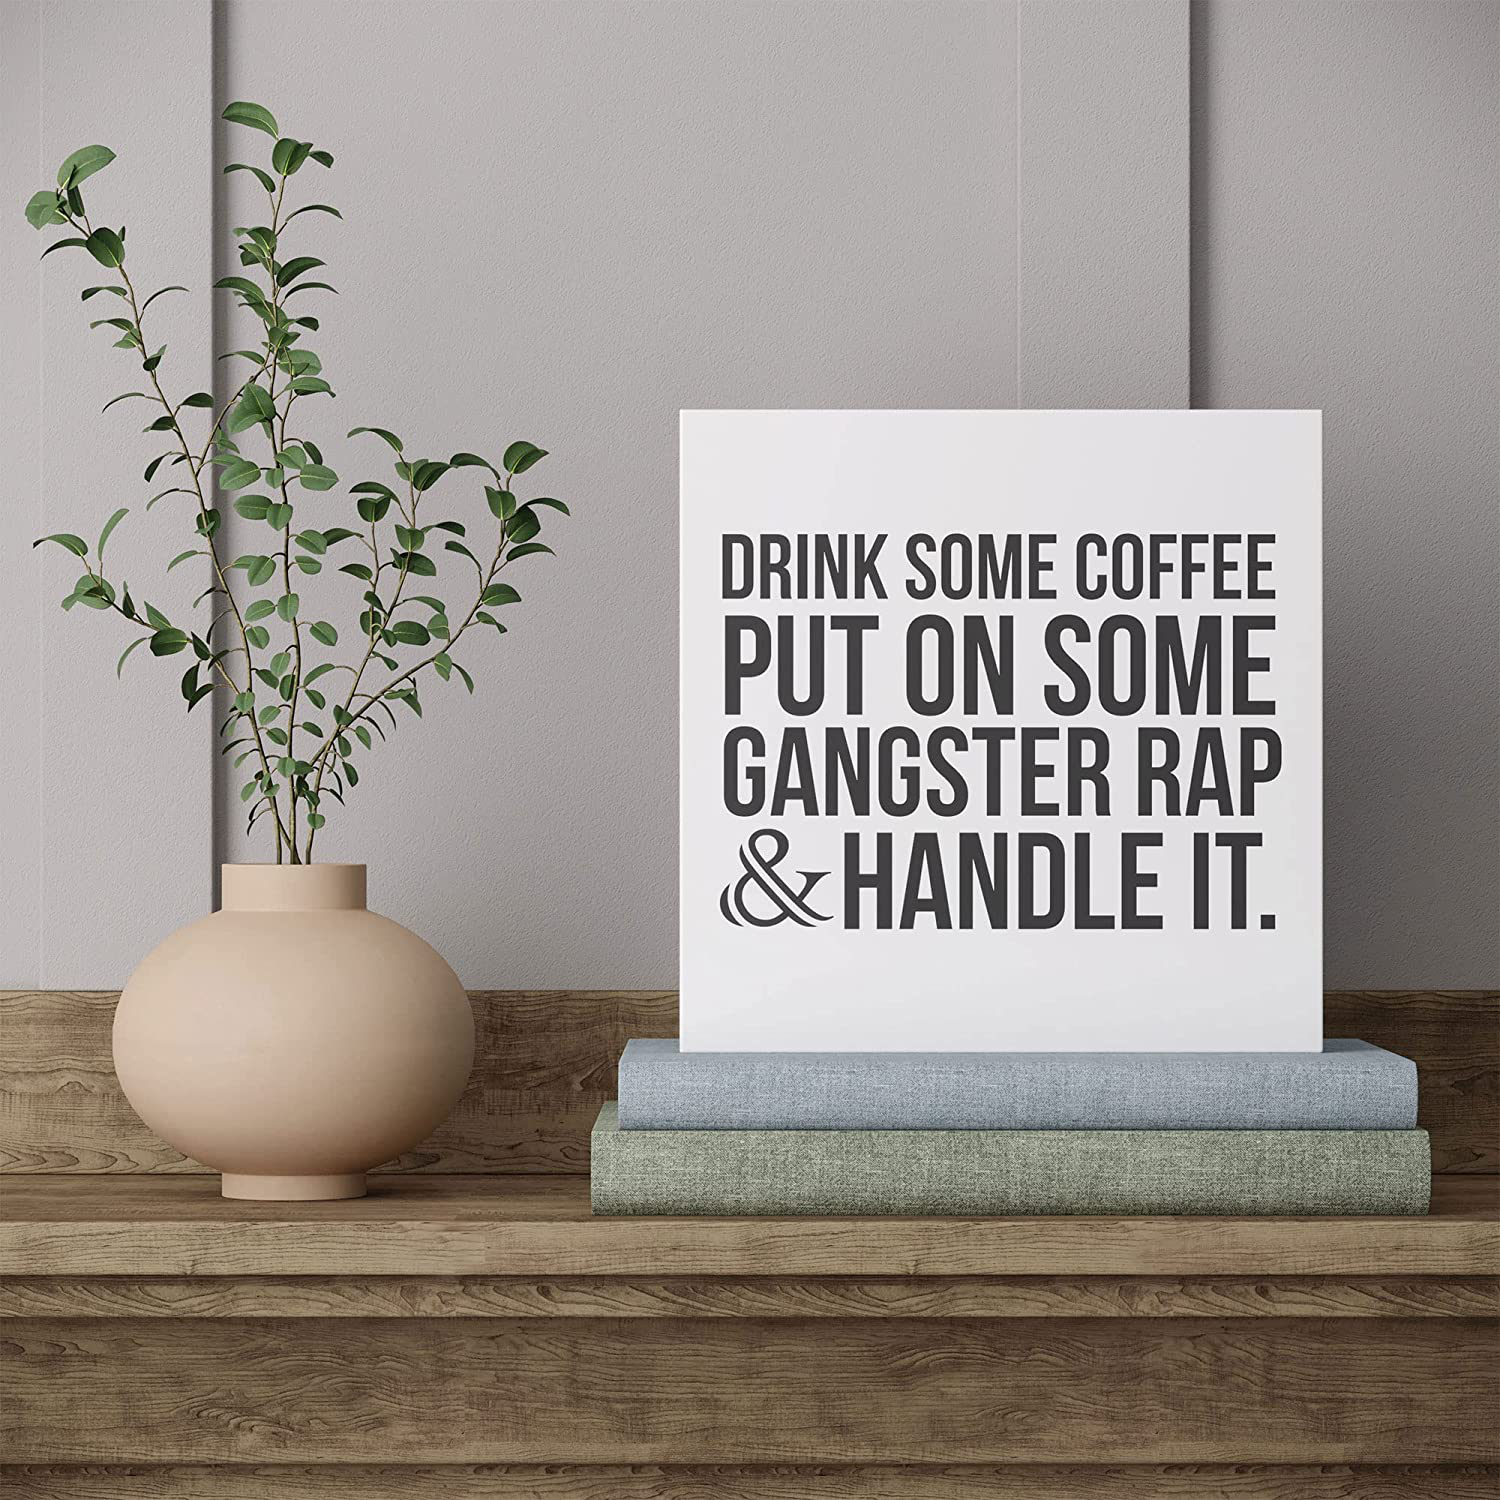 Barnyard Designs 'Gangster Rap' Box Sign, Quotes Wall Decor, Primitive Decor Office Desk Decorations for Women Office or Work, Home Accessories for Bathroom Shelf, Wooden Funny Signs with Sayings 8X8" Animals & Pet Supplies > Pet Supplies > Dog Supplies > Dog Treadmills Barnyard Designs   